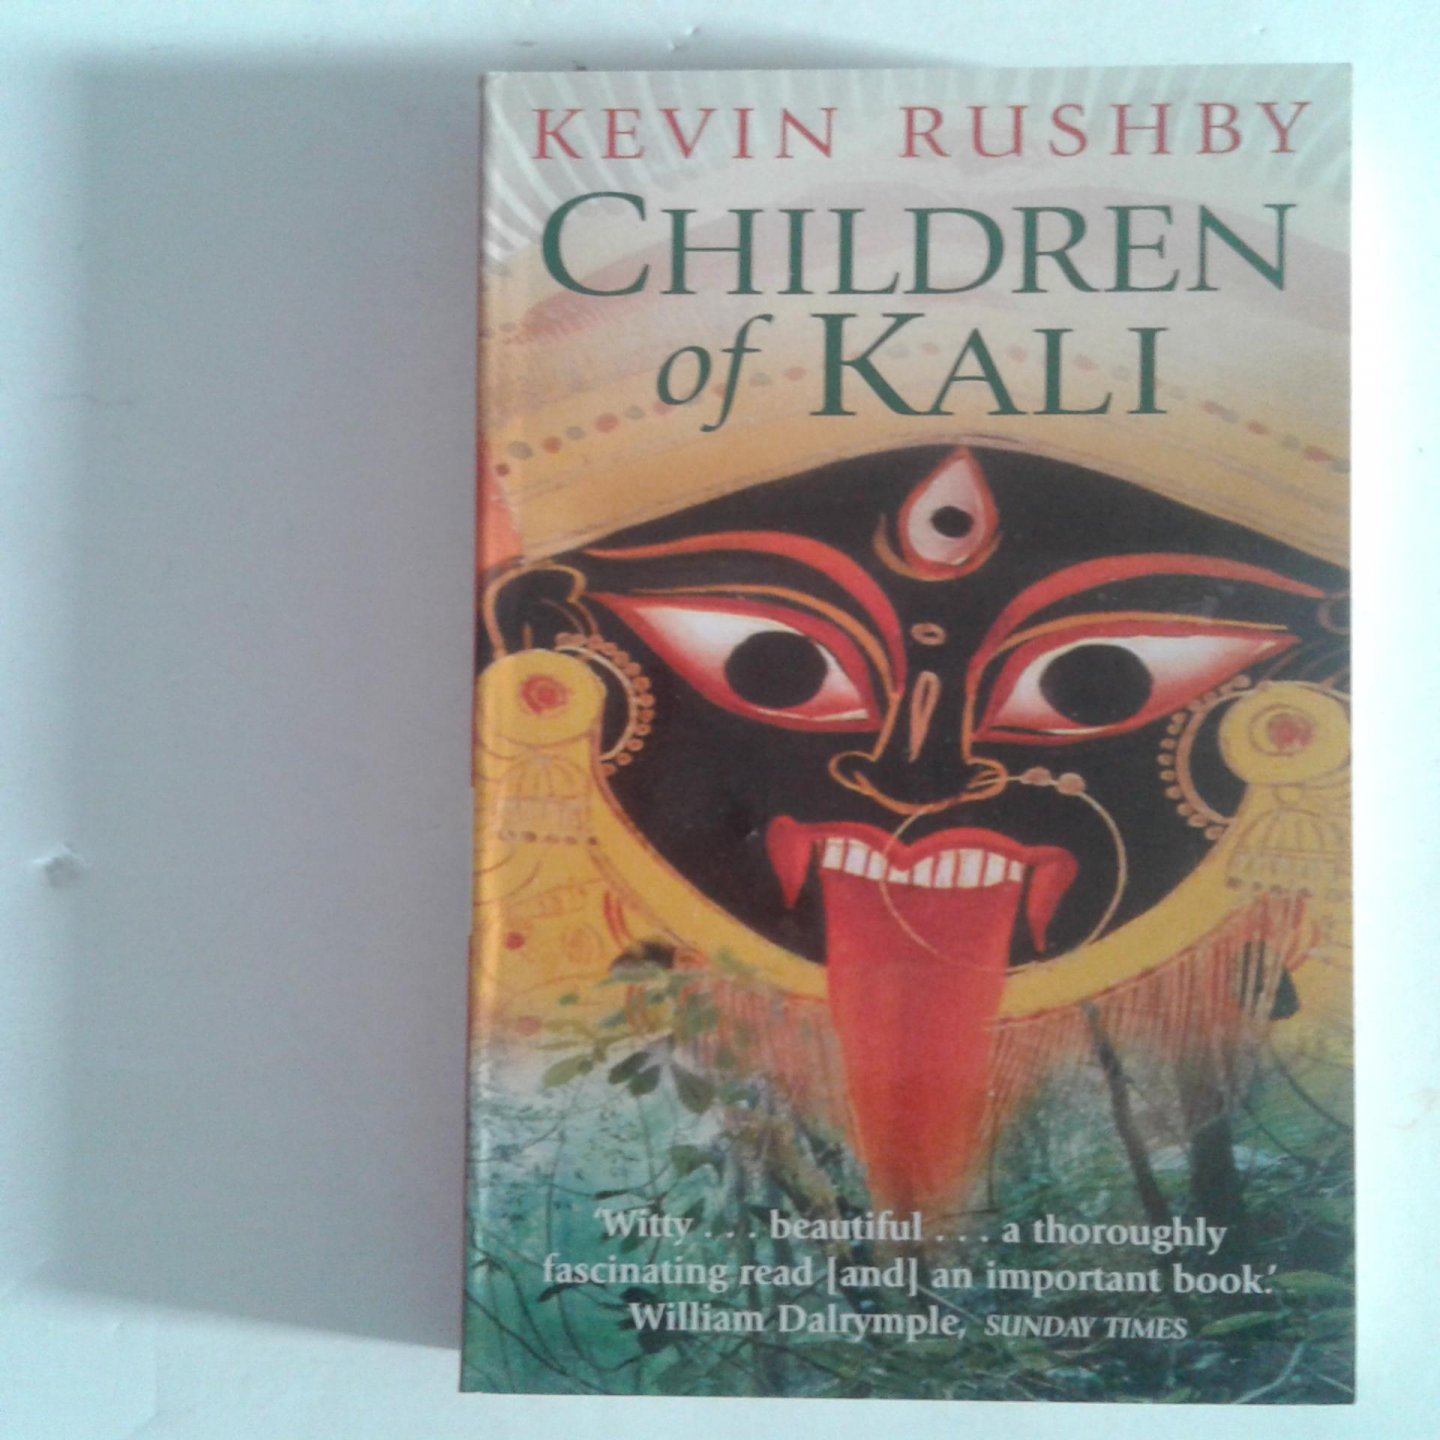 Rushby, Kevin - Children of Kali